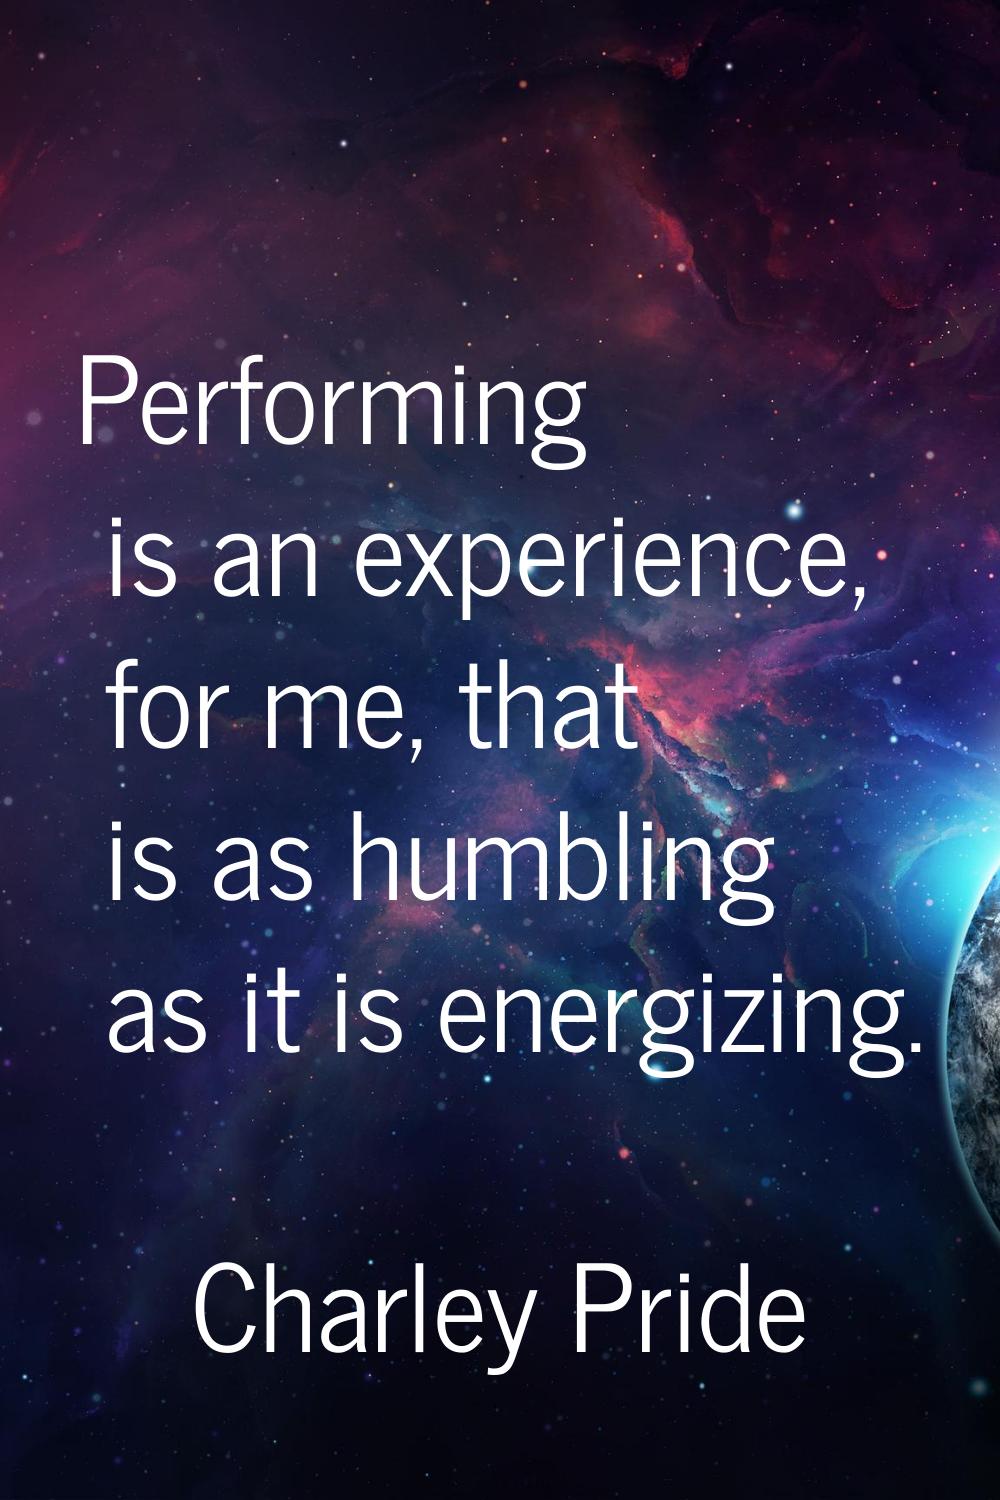 Performing is an experience, for me, that is as humbling as it is energizing.